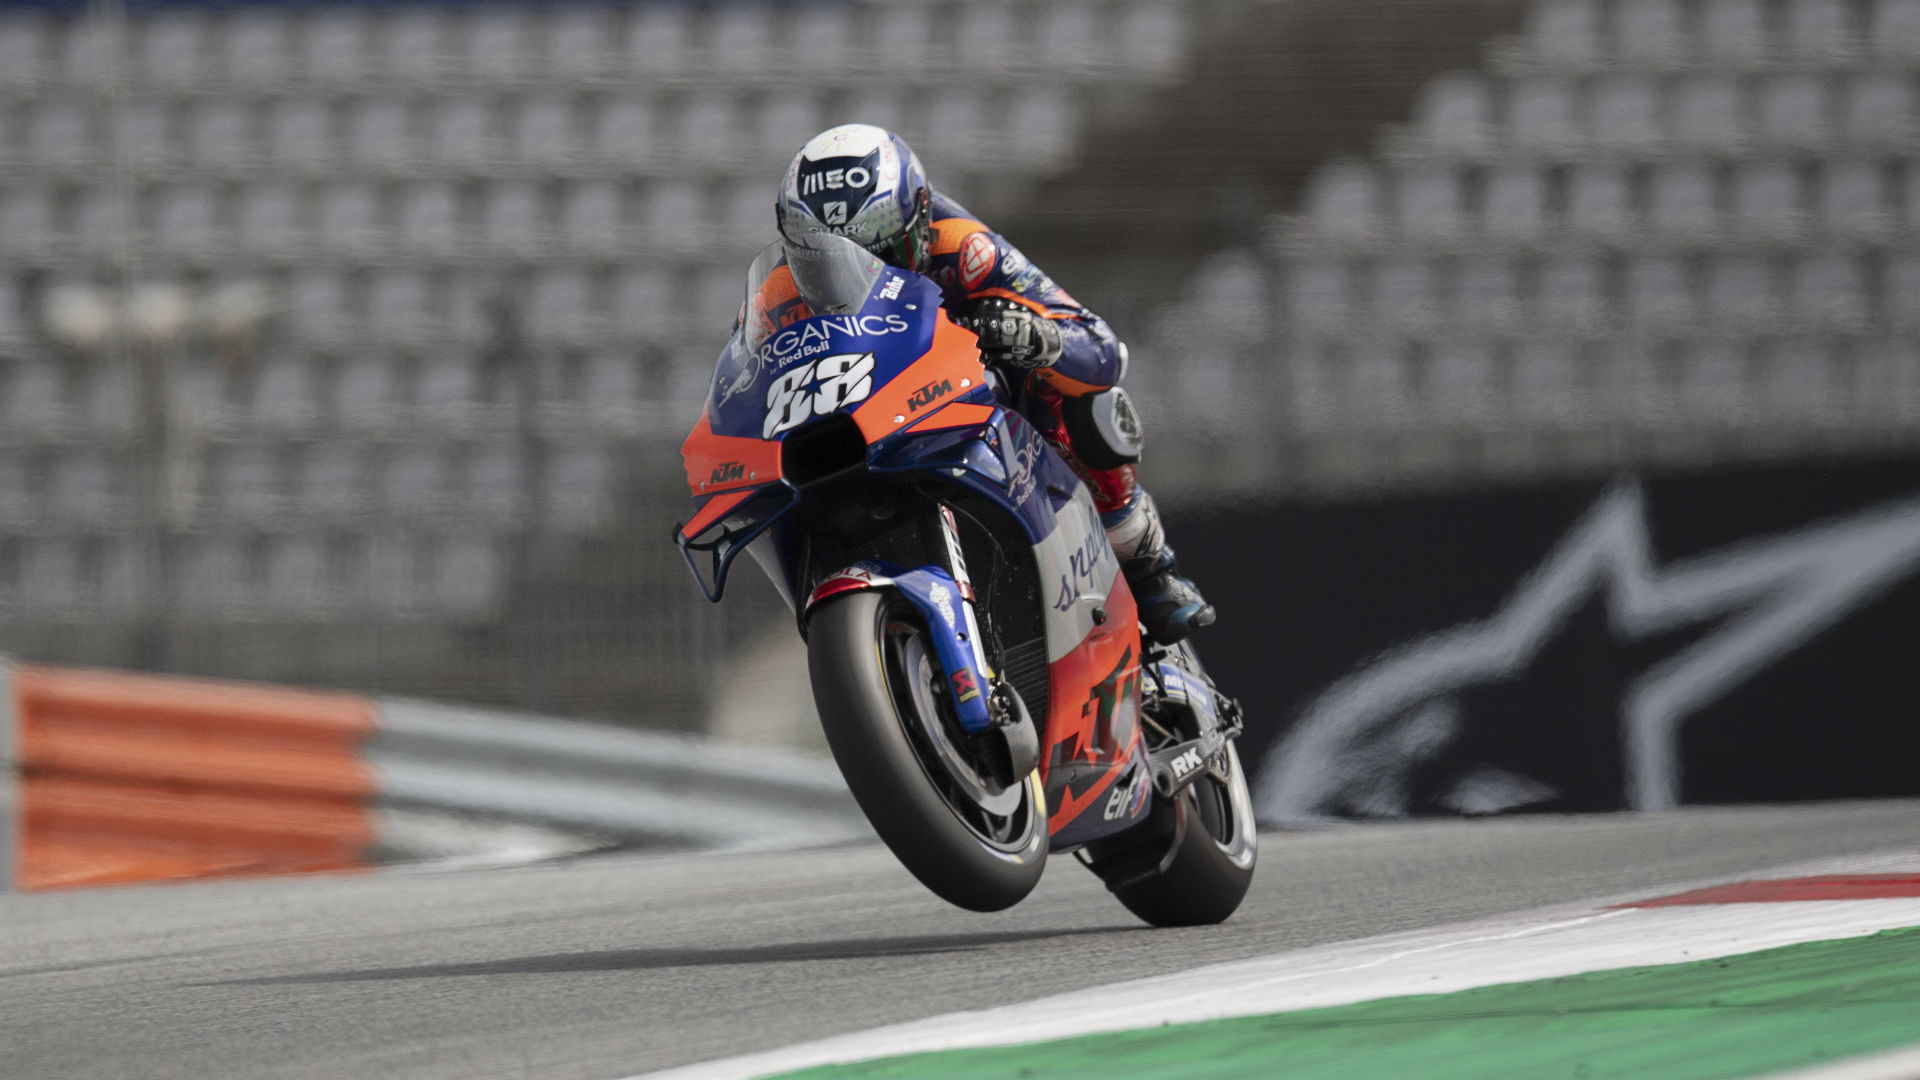 While new world champion Joan Mir struggled in qualifying, leaving him in 20th place, Miguel Oliveira claimed pole in the Algarve.